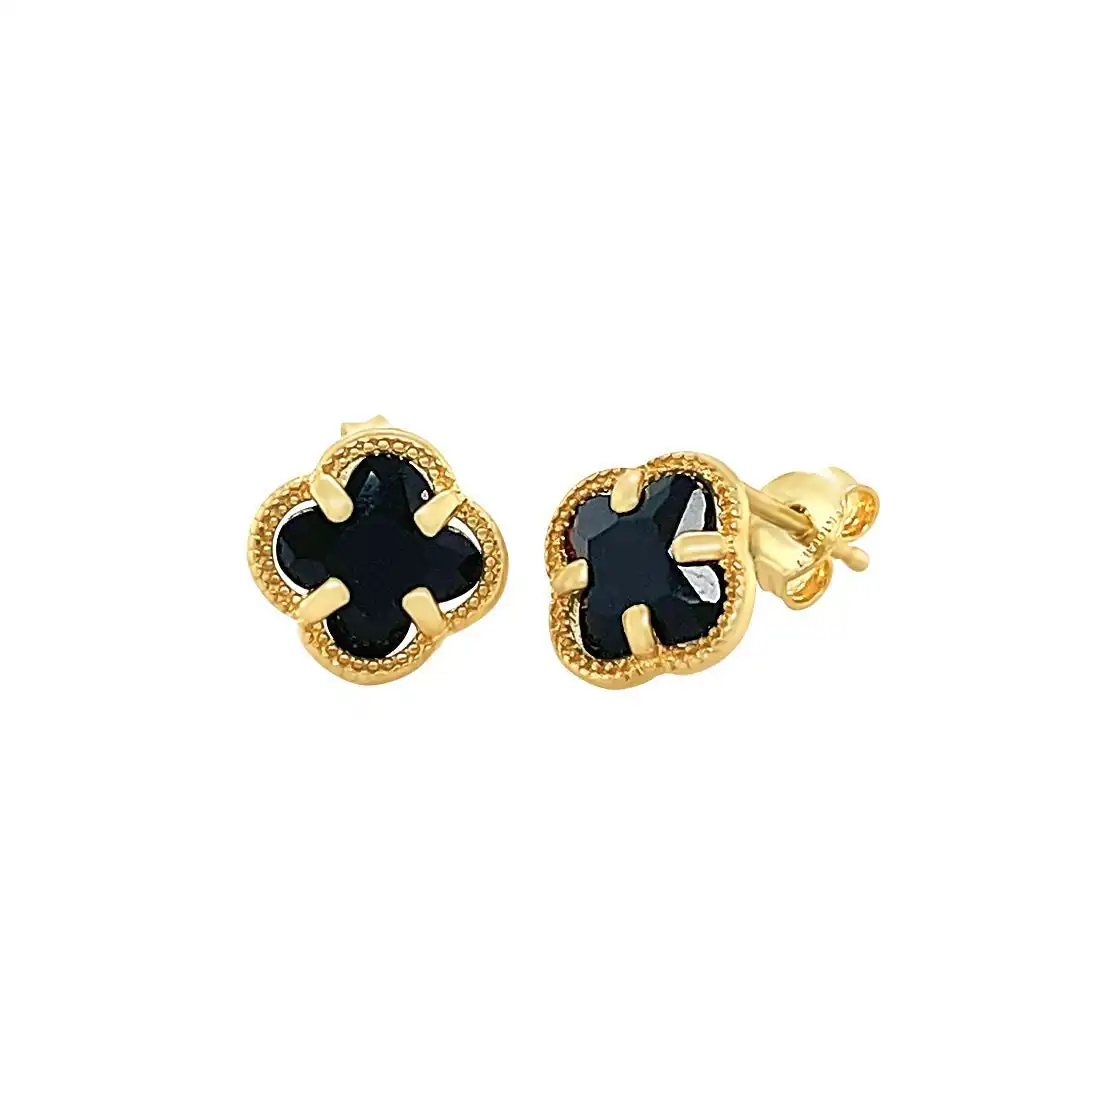 9ct Yellow Gold Silver Infused Black 4 Leaf Clover Stud Earrings